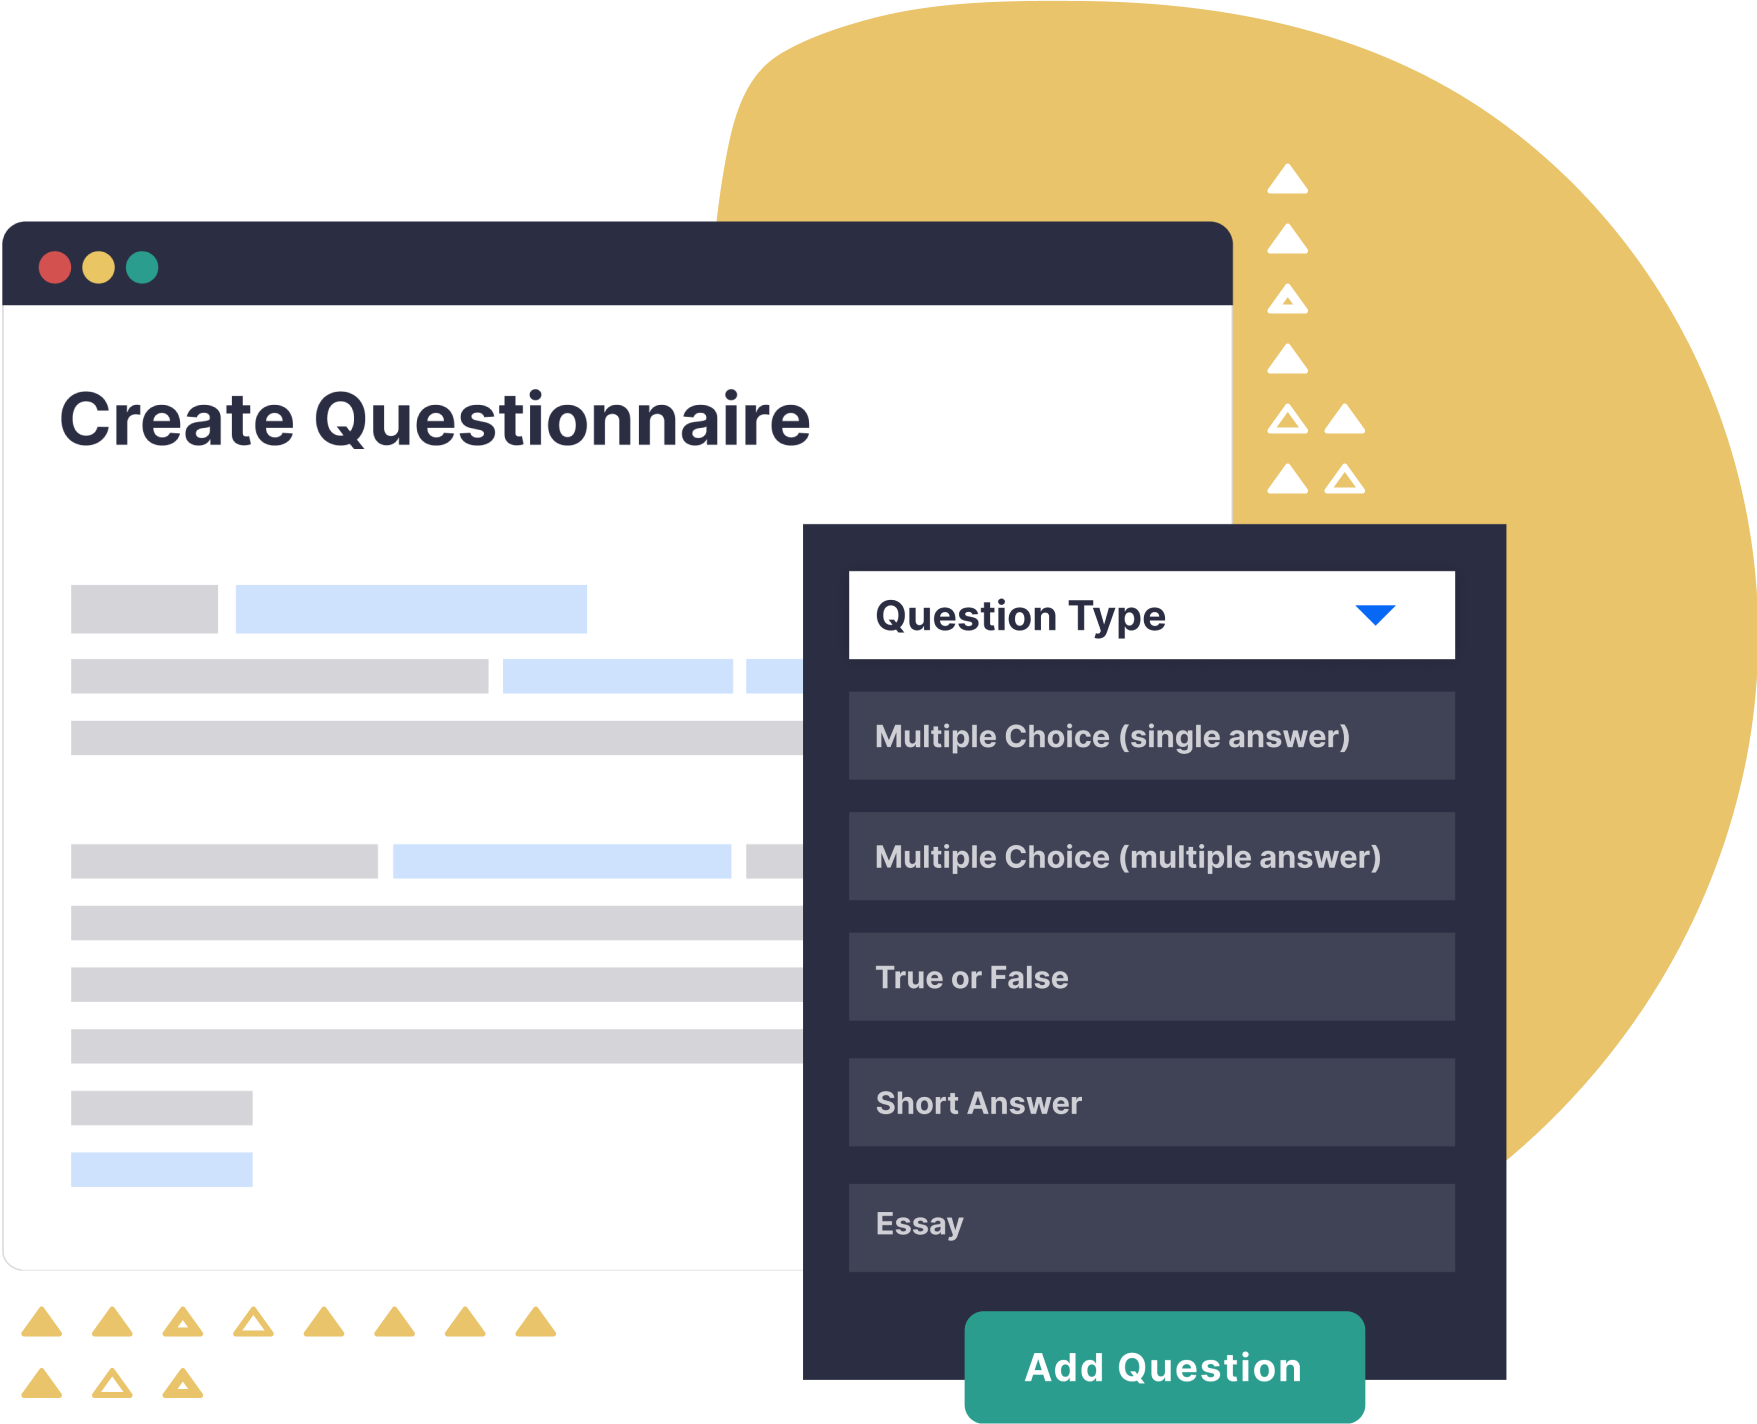 Get Actionable Insights With Questionnaires